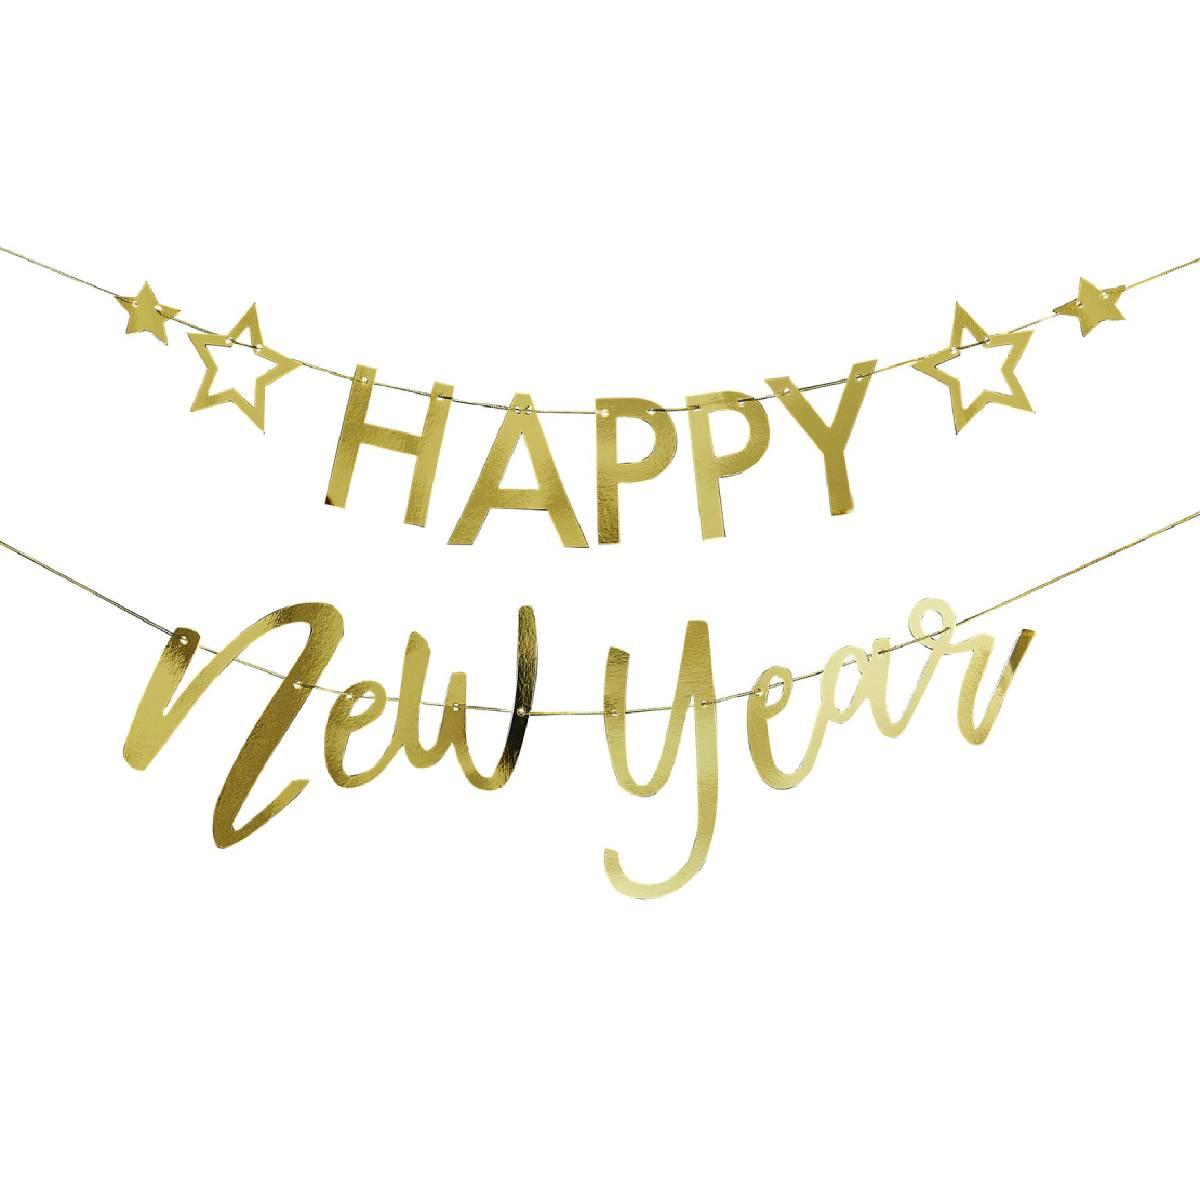 Happy New Year gold foil banner by Ginger Ray POP-414 available here at Karnival Costumes online party shop